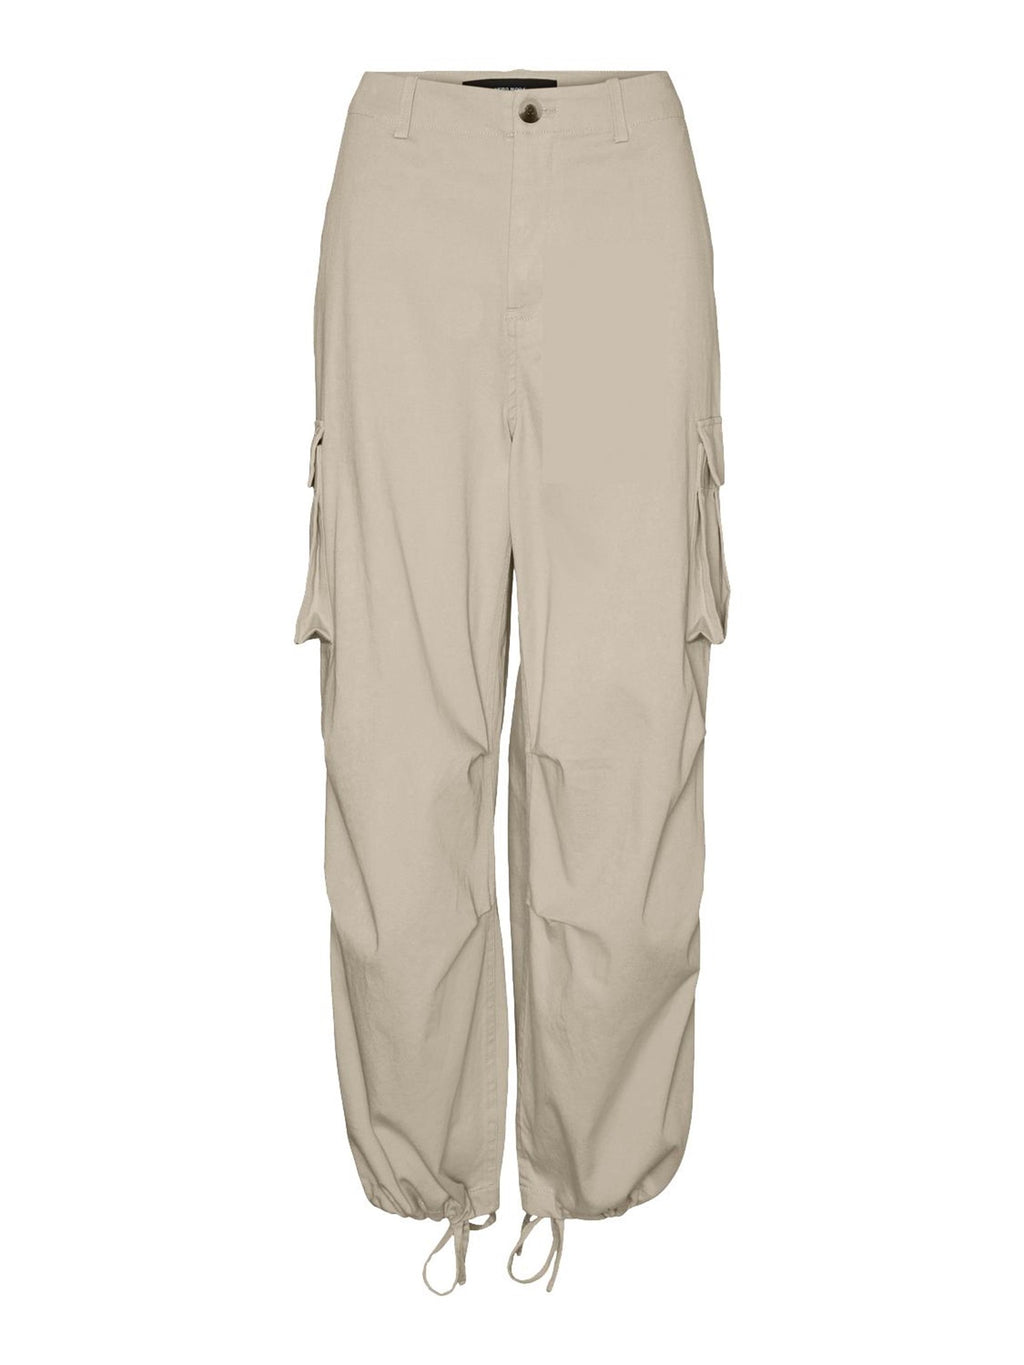 Emili Baggy Cargo Pants - Oyster Gray